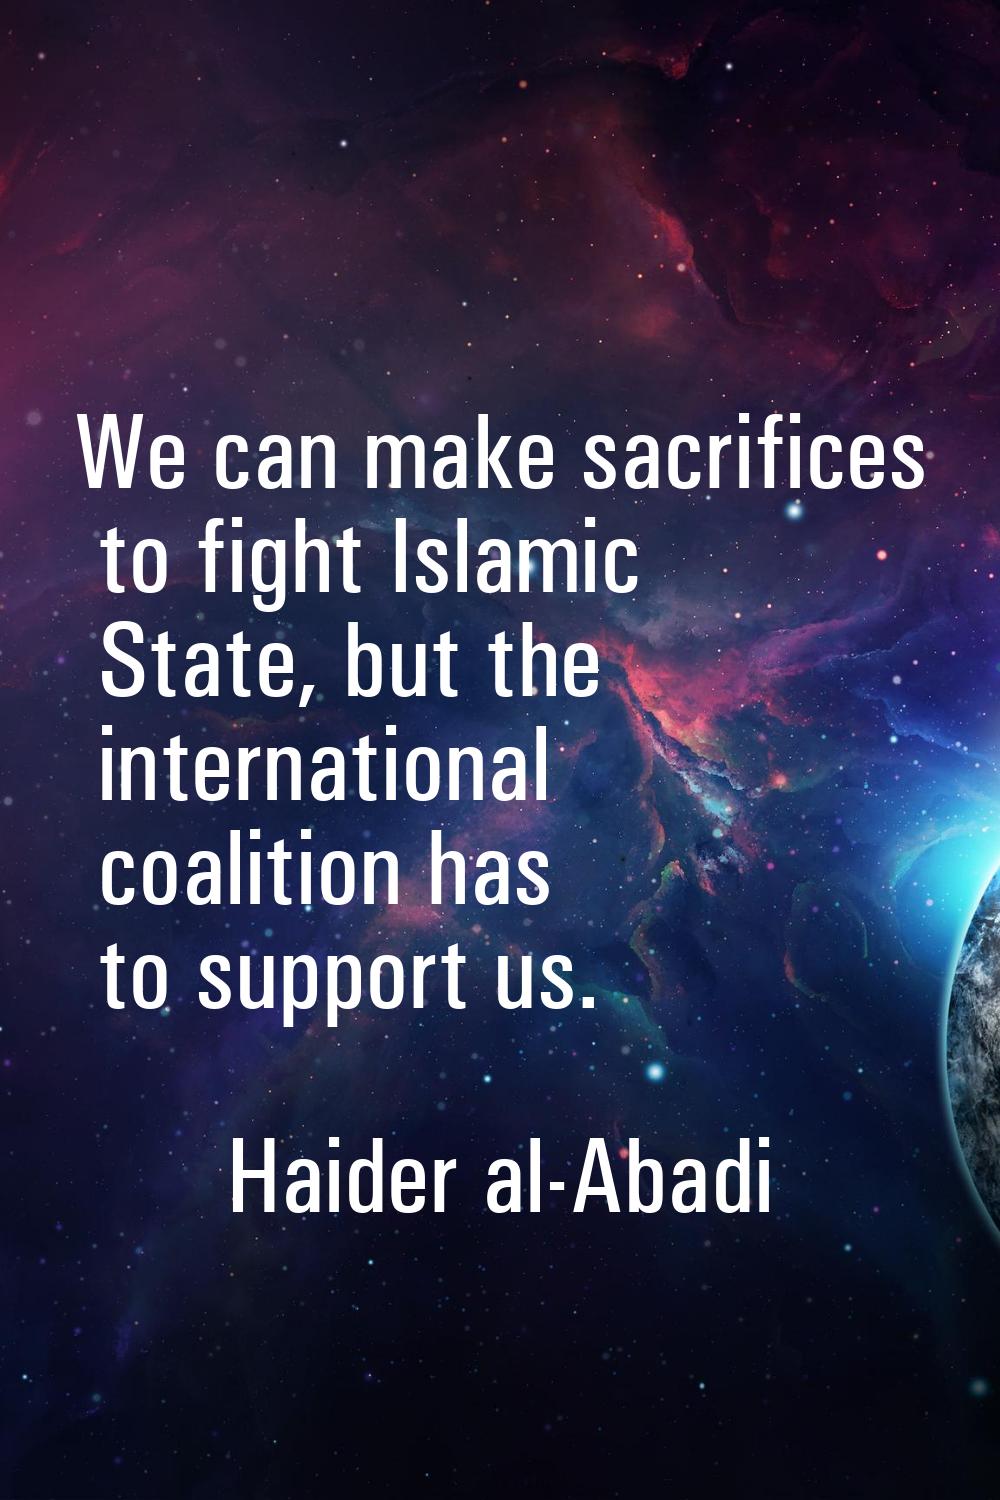 We can make sacrifices to fight Islamic State, but the international coalition has to support us.